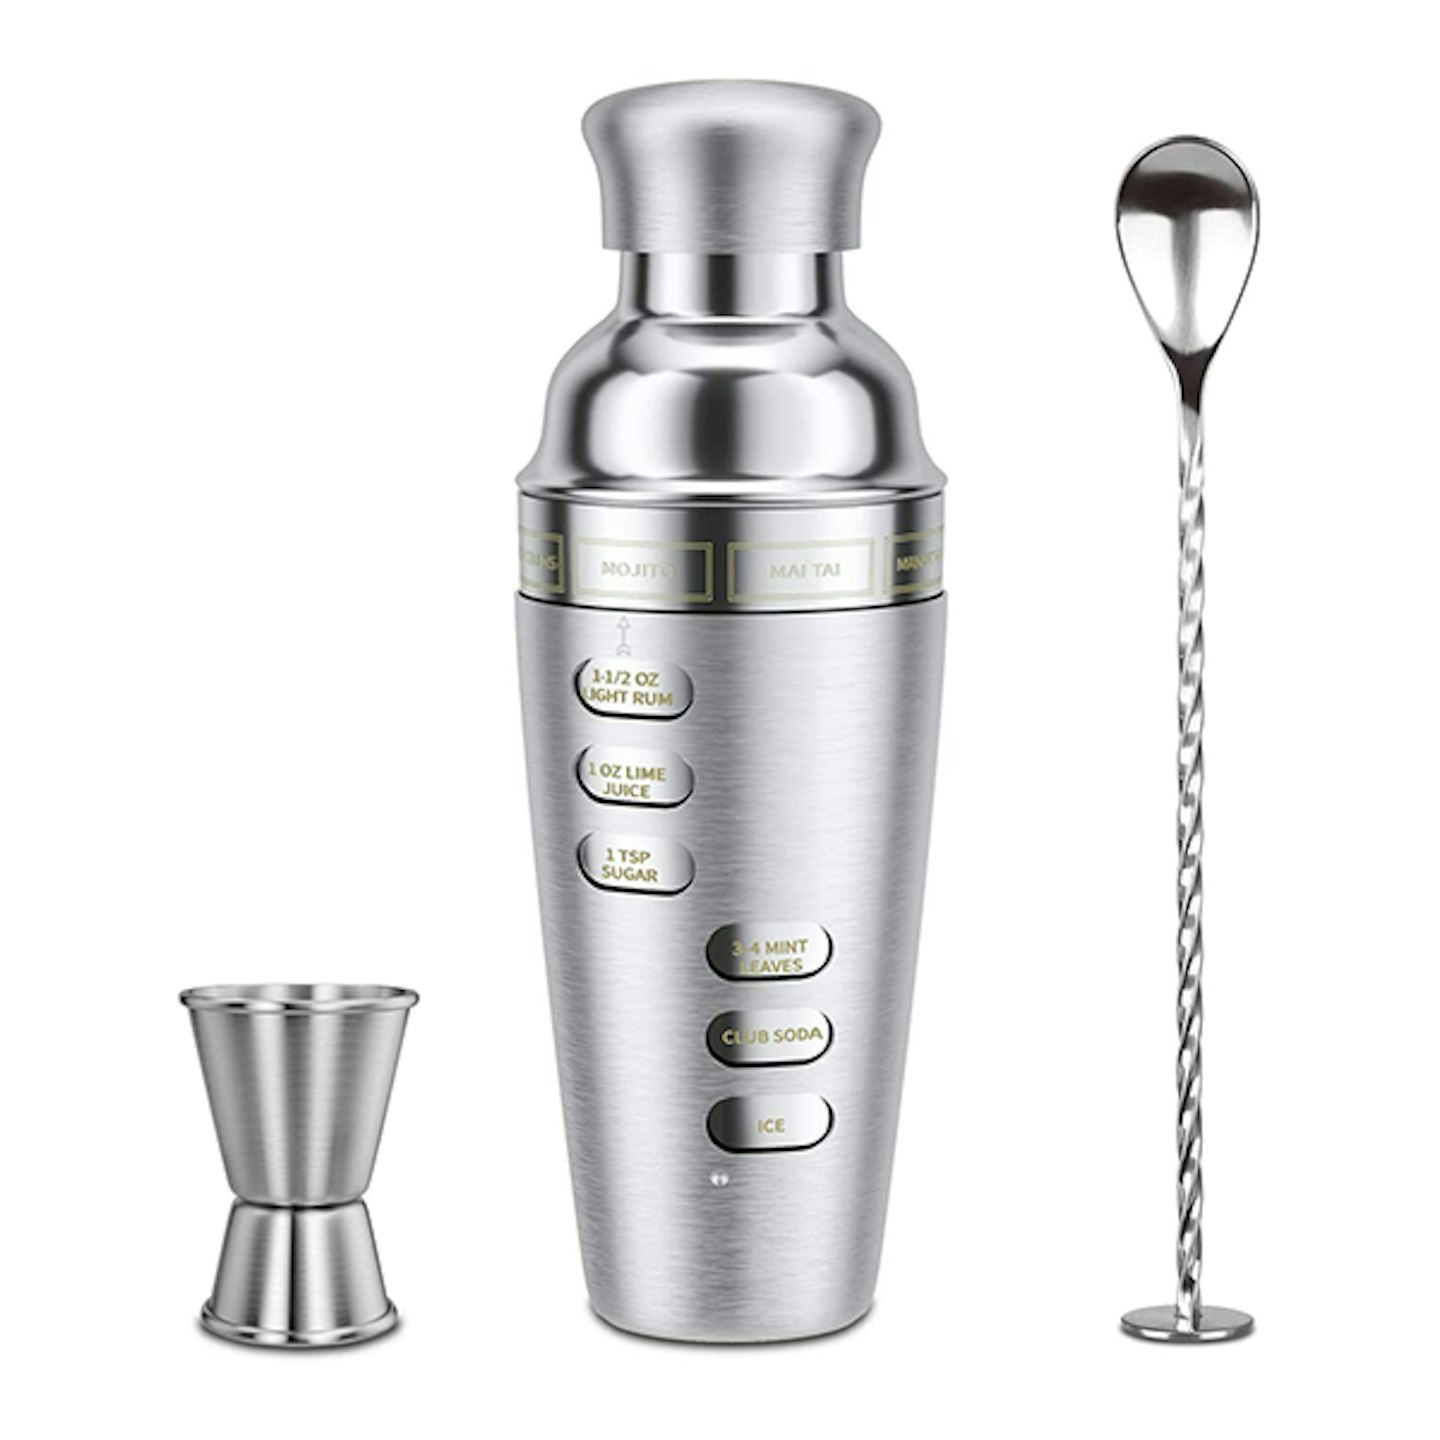 Blusmart 5pcs 700ML Cocktail Shaker Set with Rotation Recipe Guide